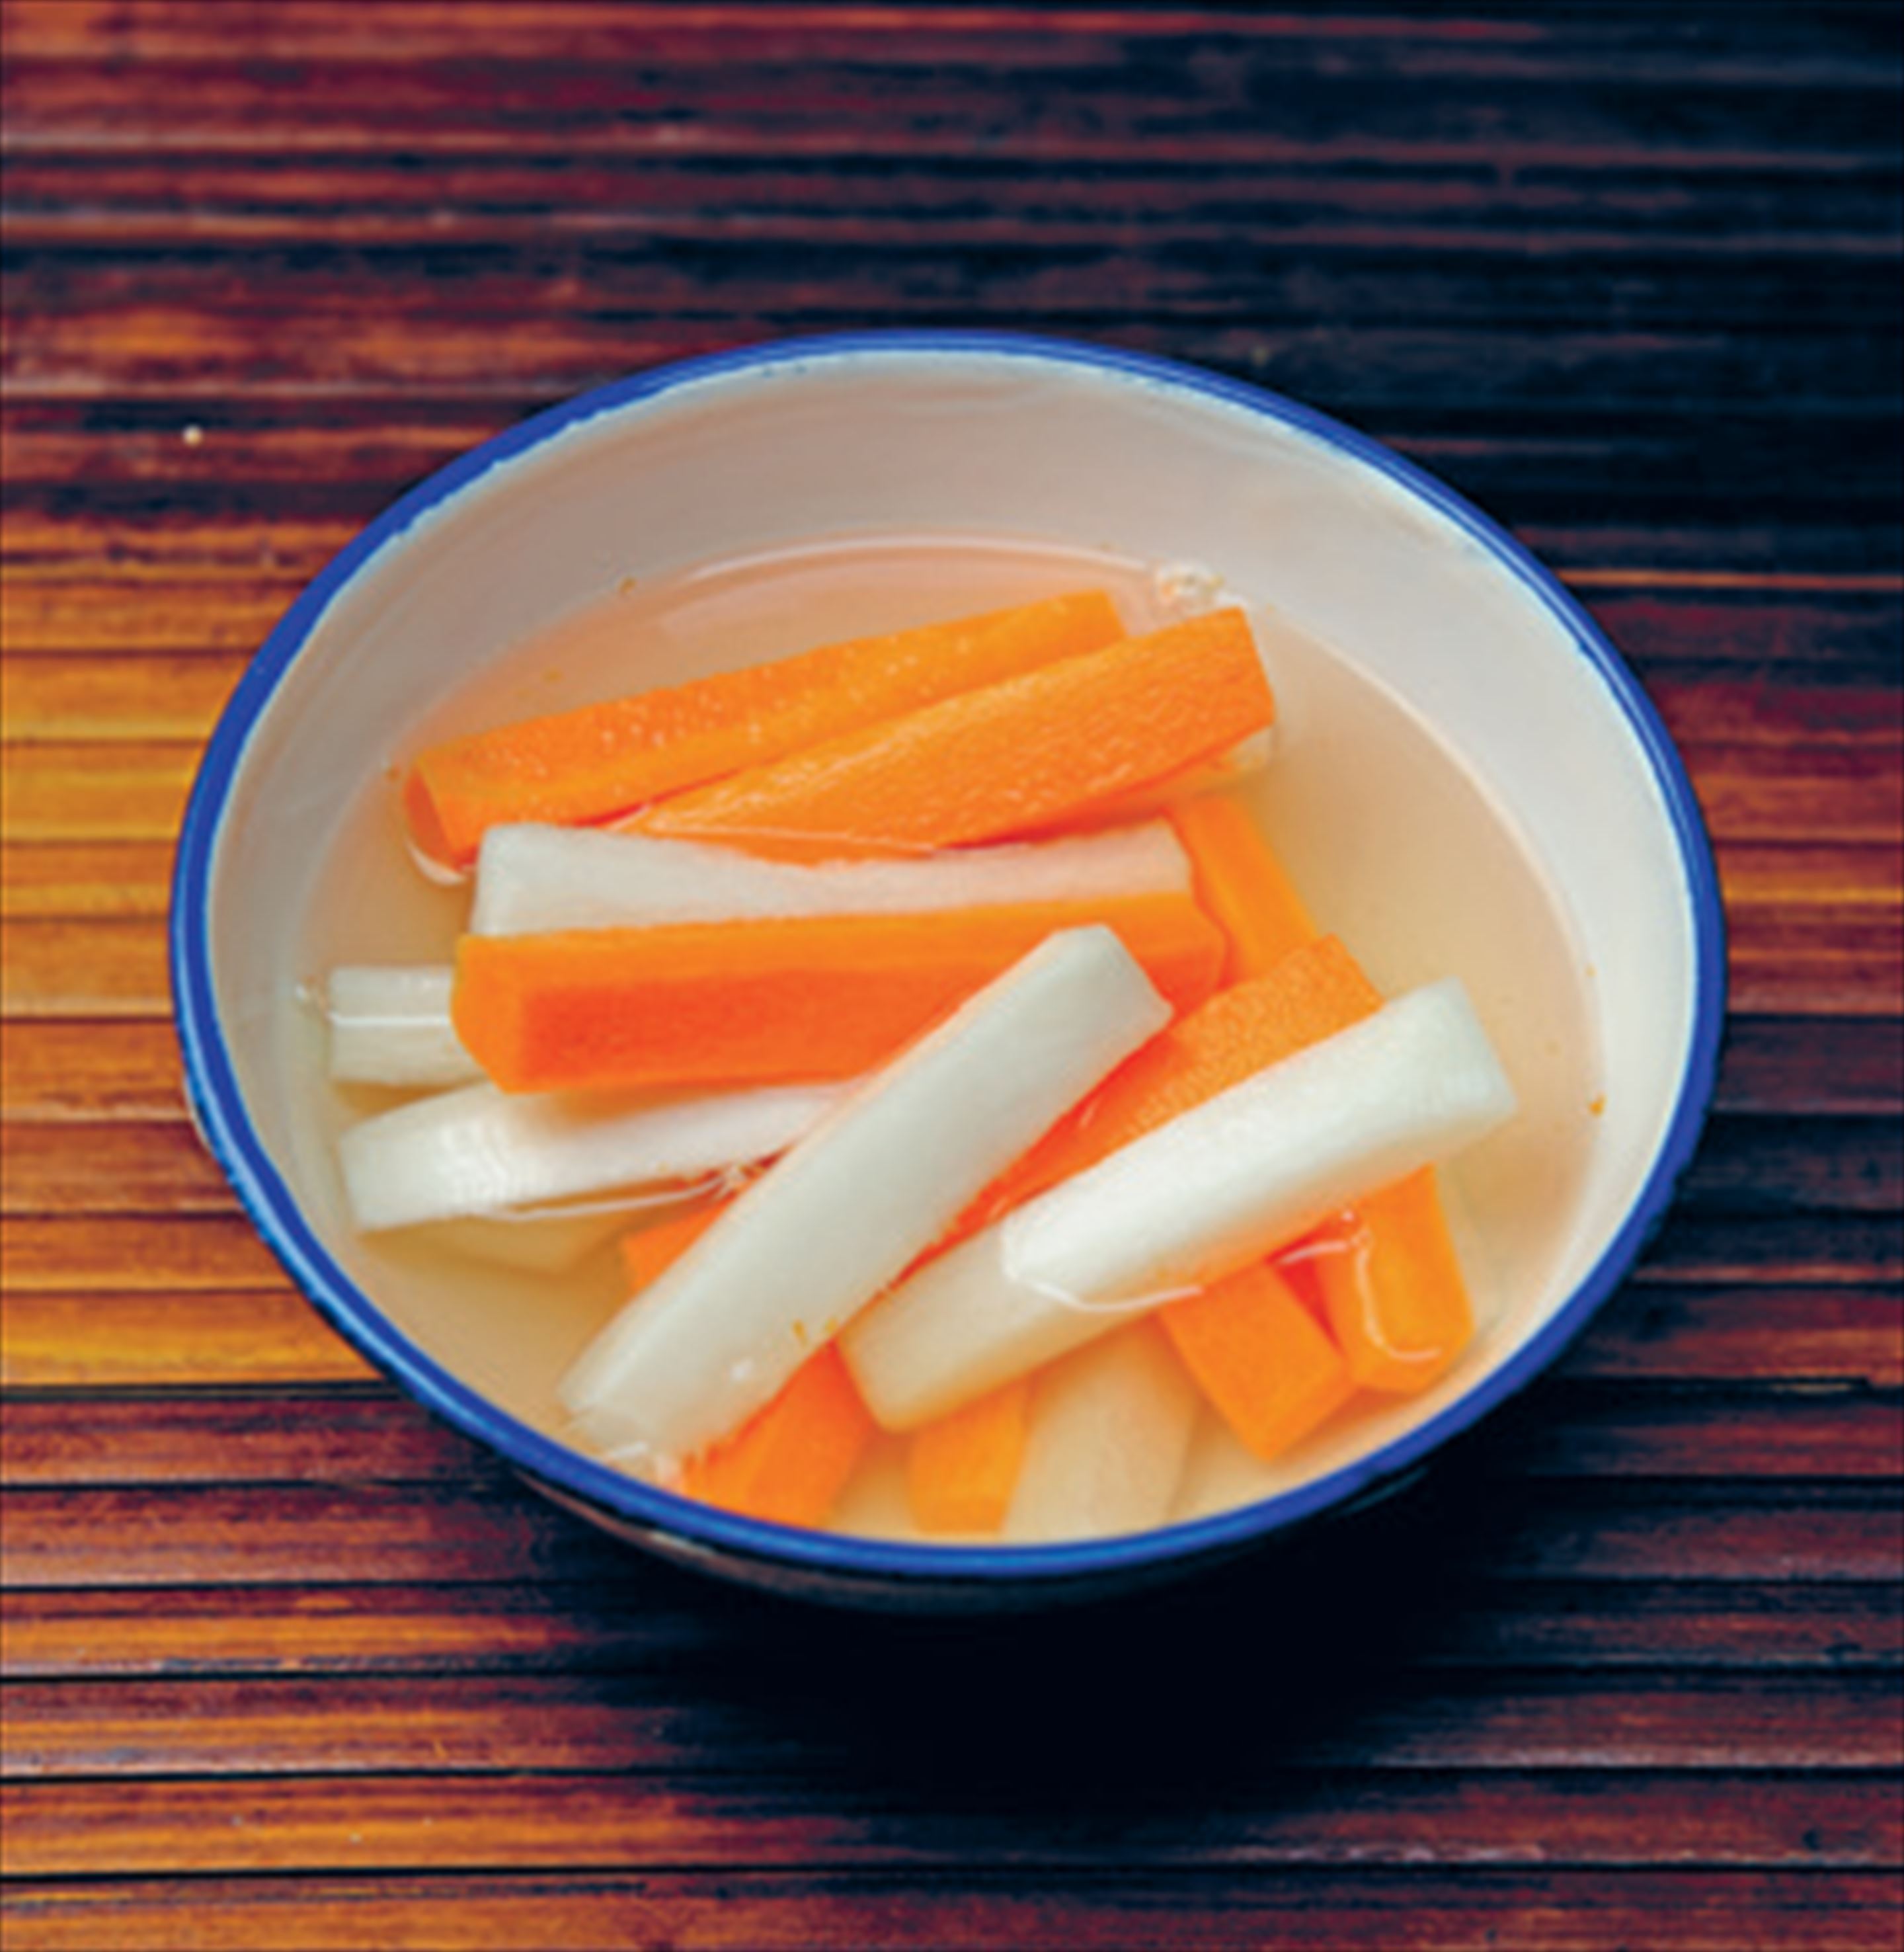 Carrot and daikon pickle